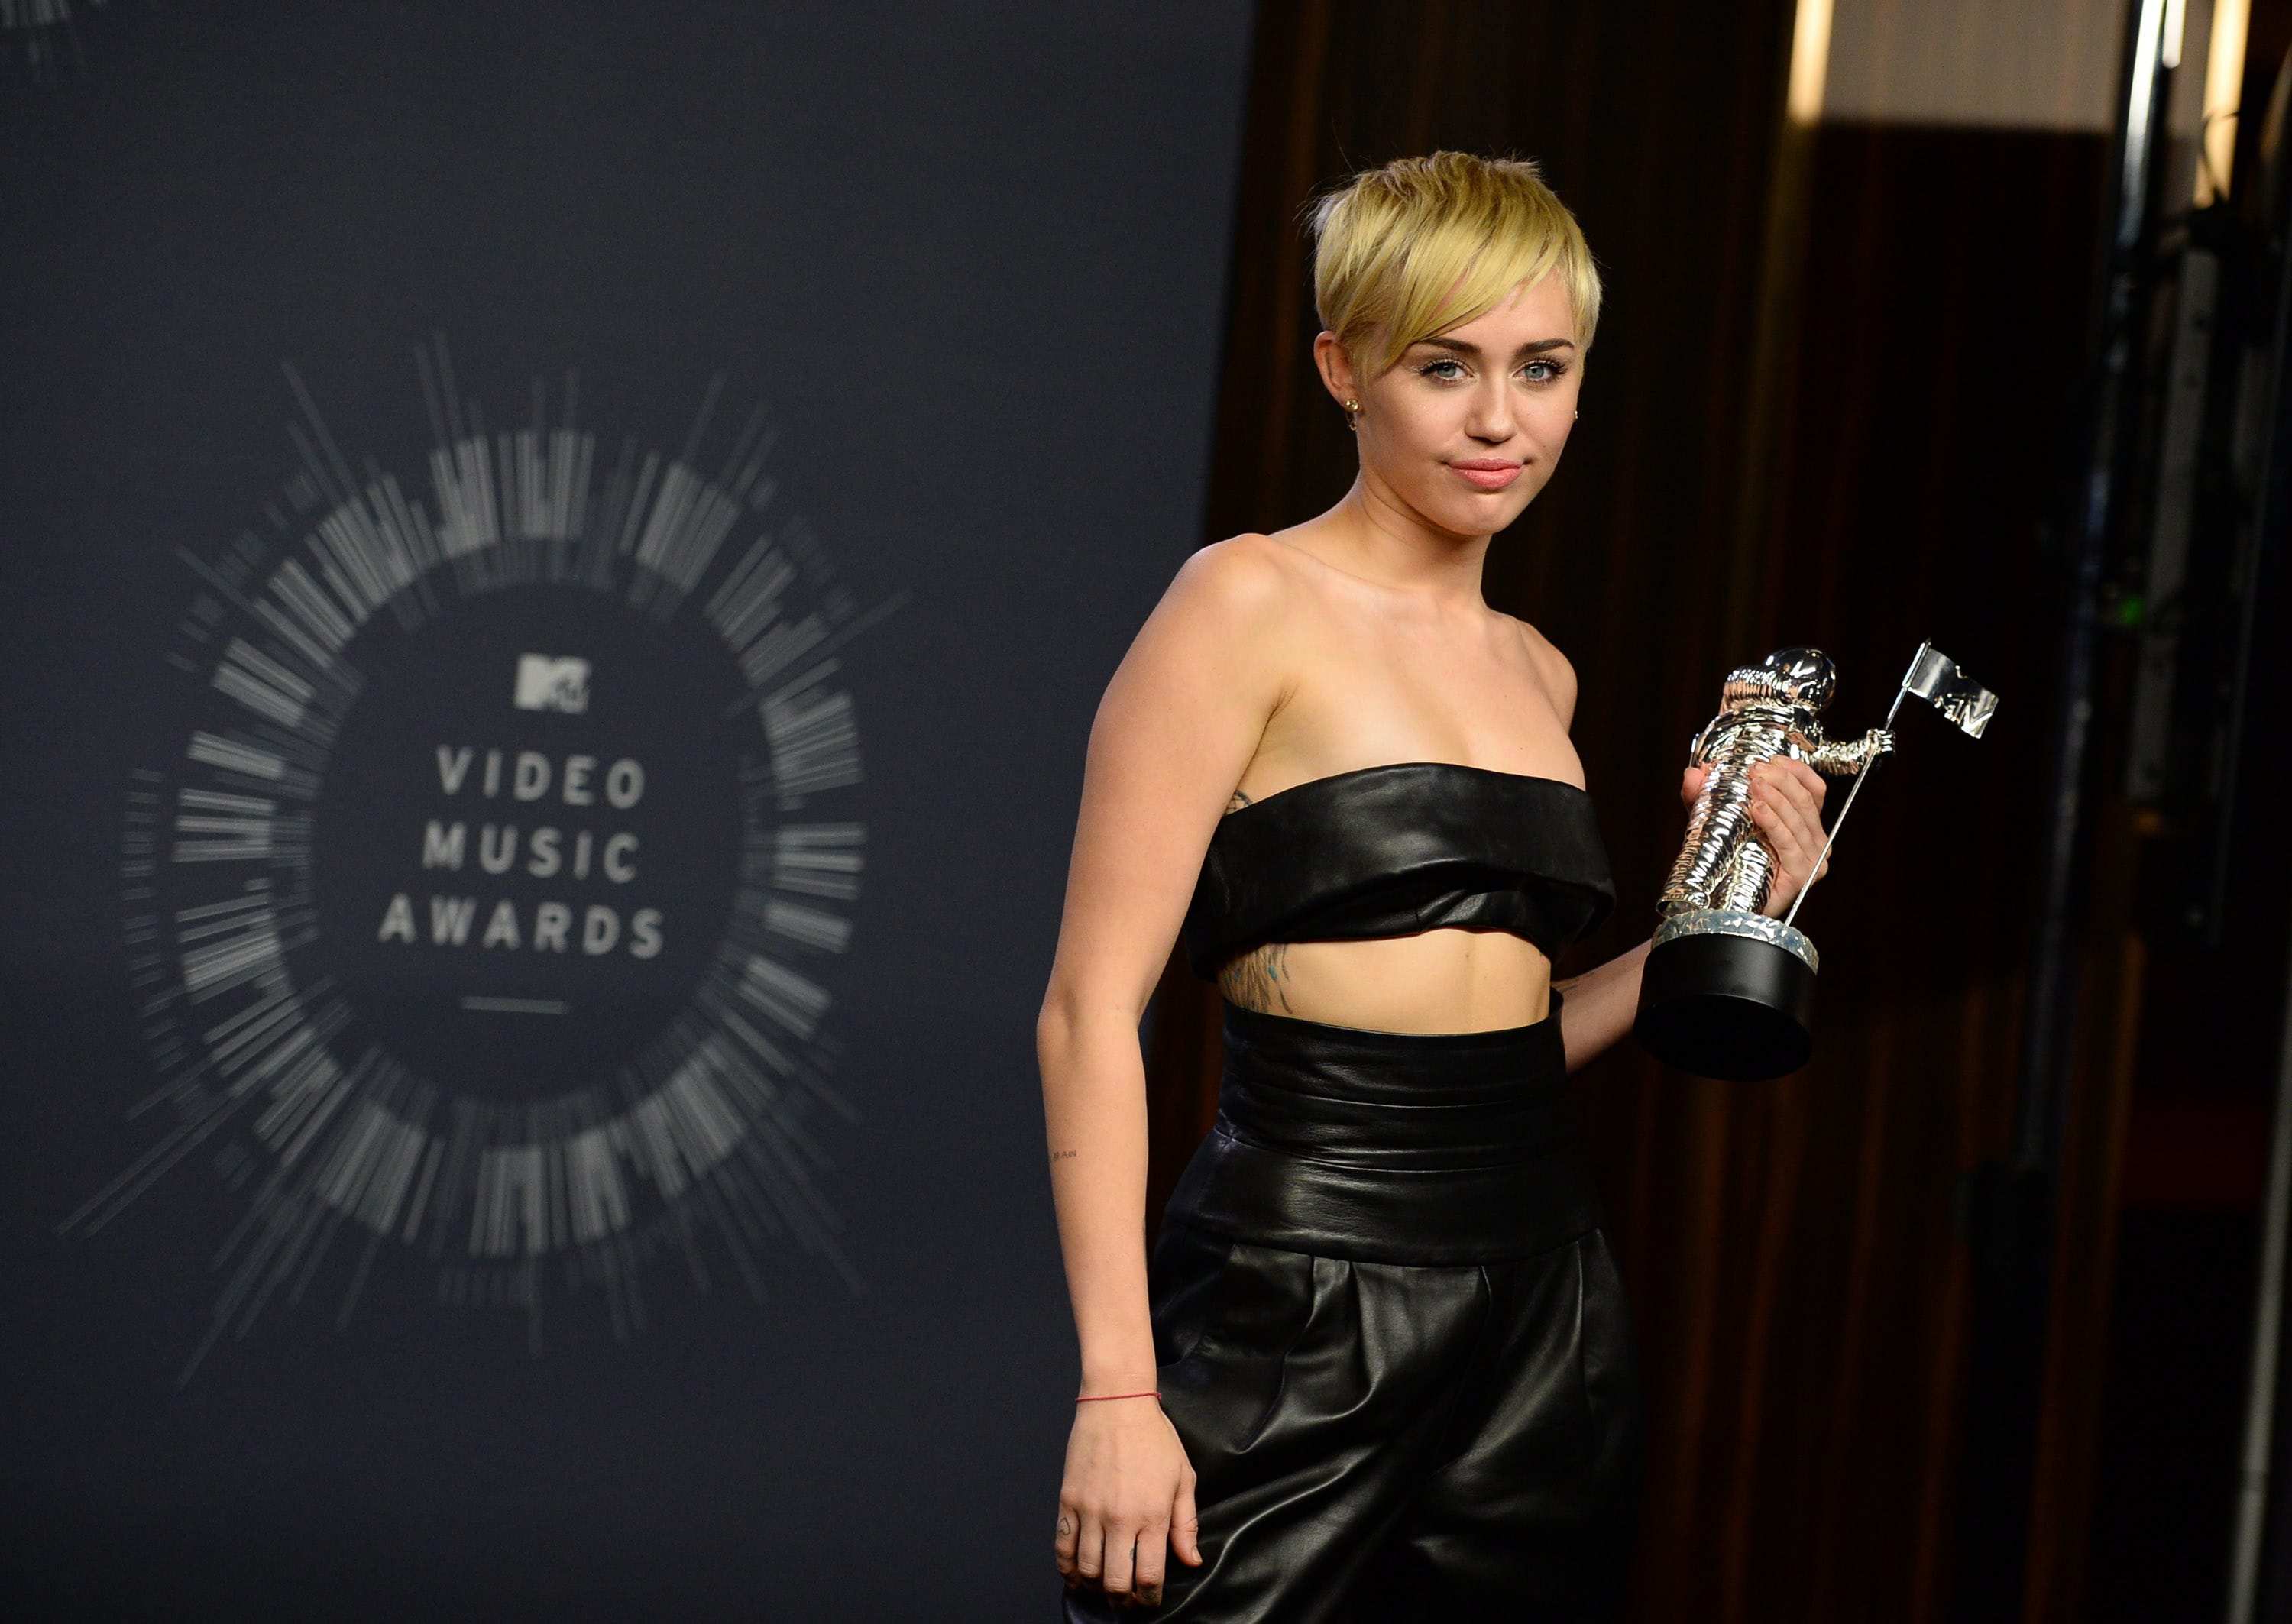 Miley Cyrus poses with the award for Video of the Year in the press room at the MTV Video Music Awards at The Forum on Sunday in Inglewood, Calif.